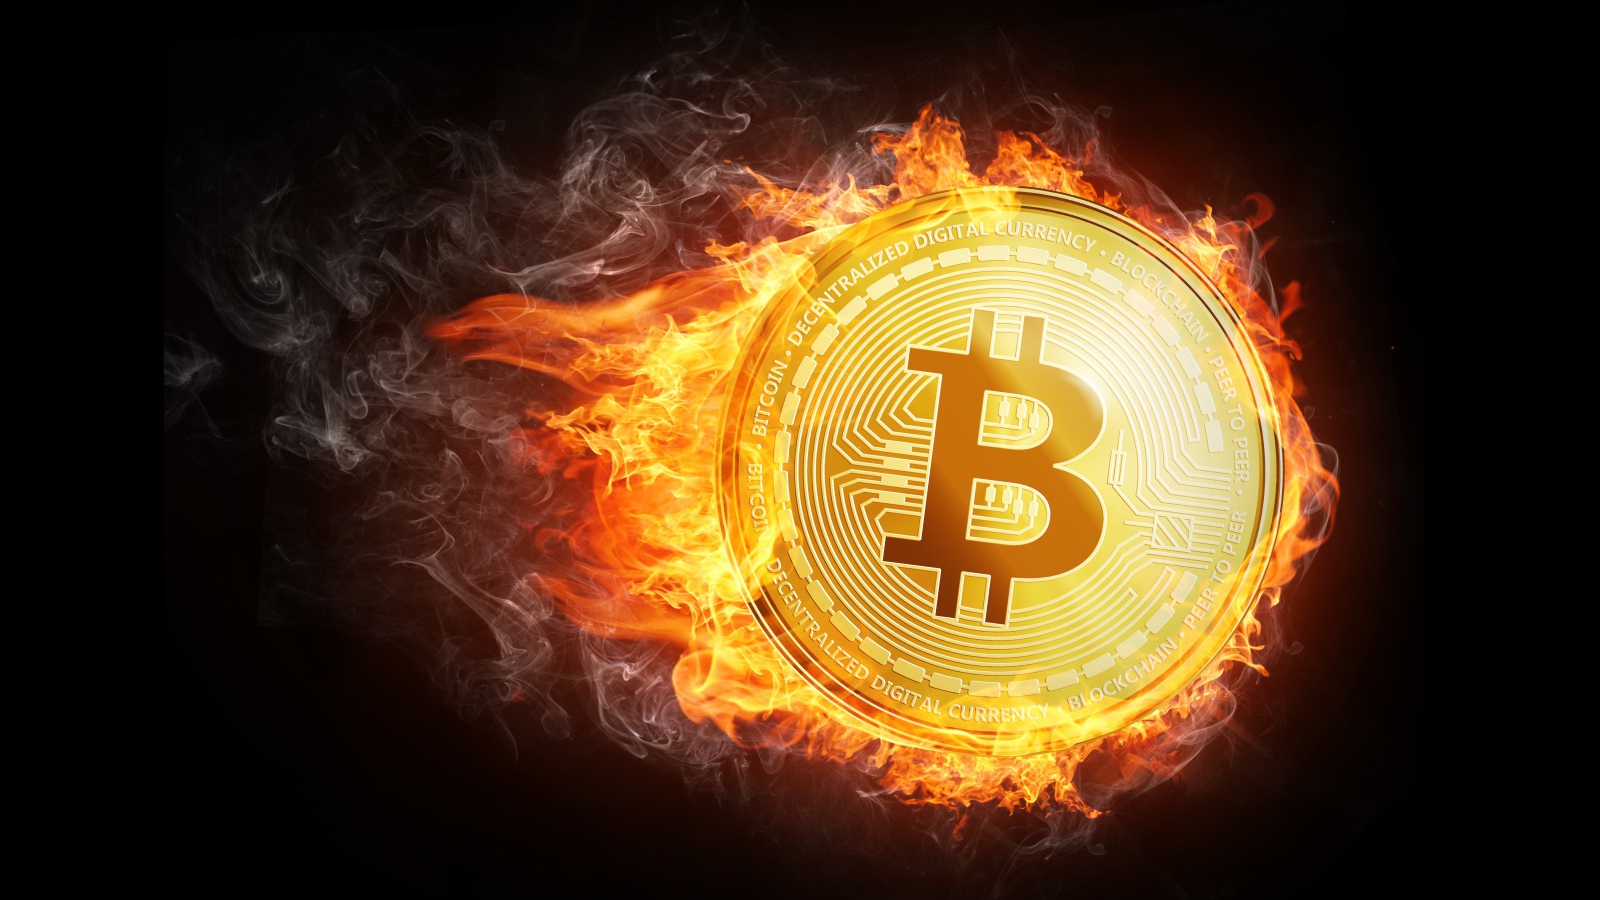 Flying fiery bitcoin coin on black background